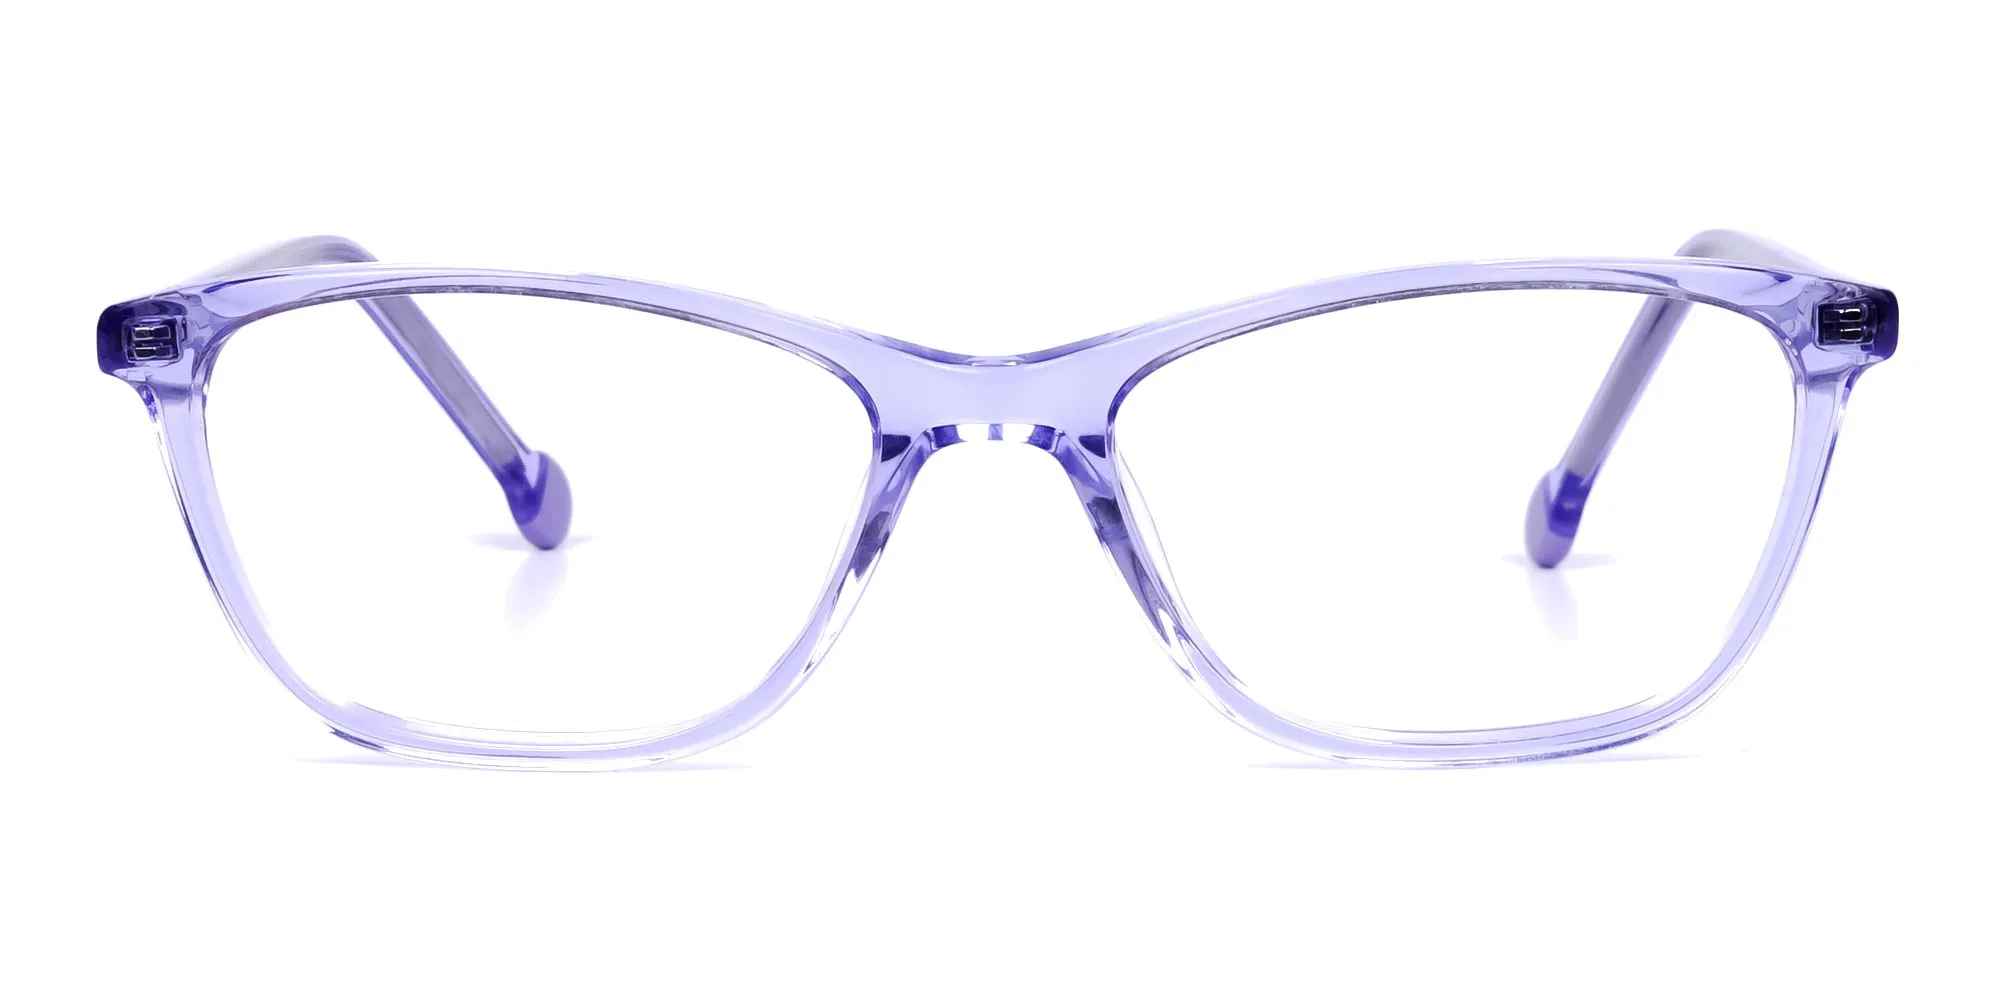 glasses for round chubby face female 2022-2